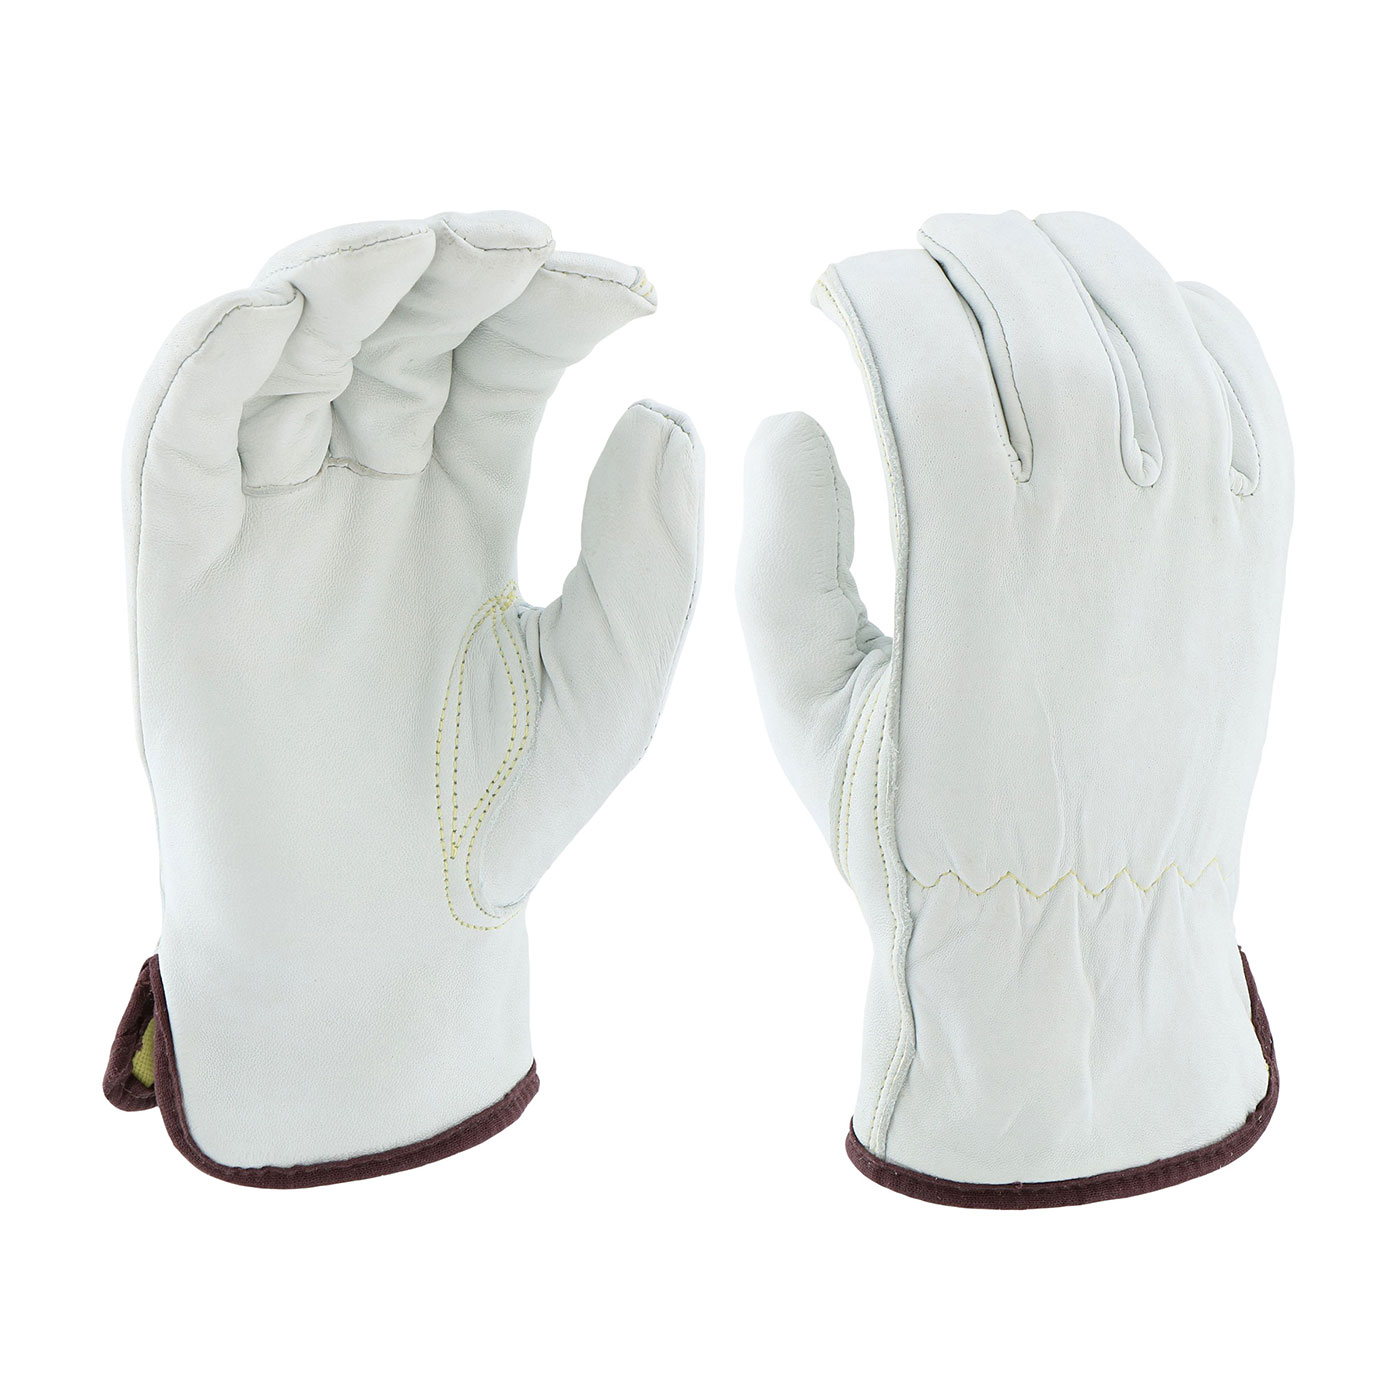 PIP® 9110/M Standard Grade Cut-Resistant Gloves, M, Sheep Grain Leather, Slip-On Cuff, Resists: Abrasion, Cut, Puncture and Tear, ANSI Cut-Resistance Level: A4, Paired Hand